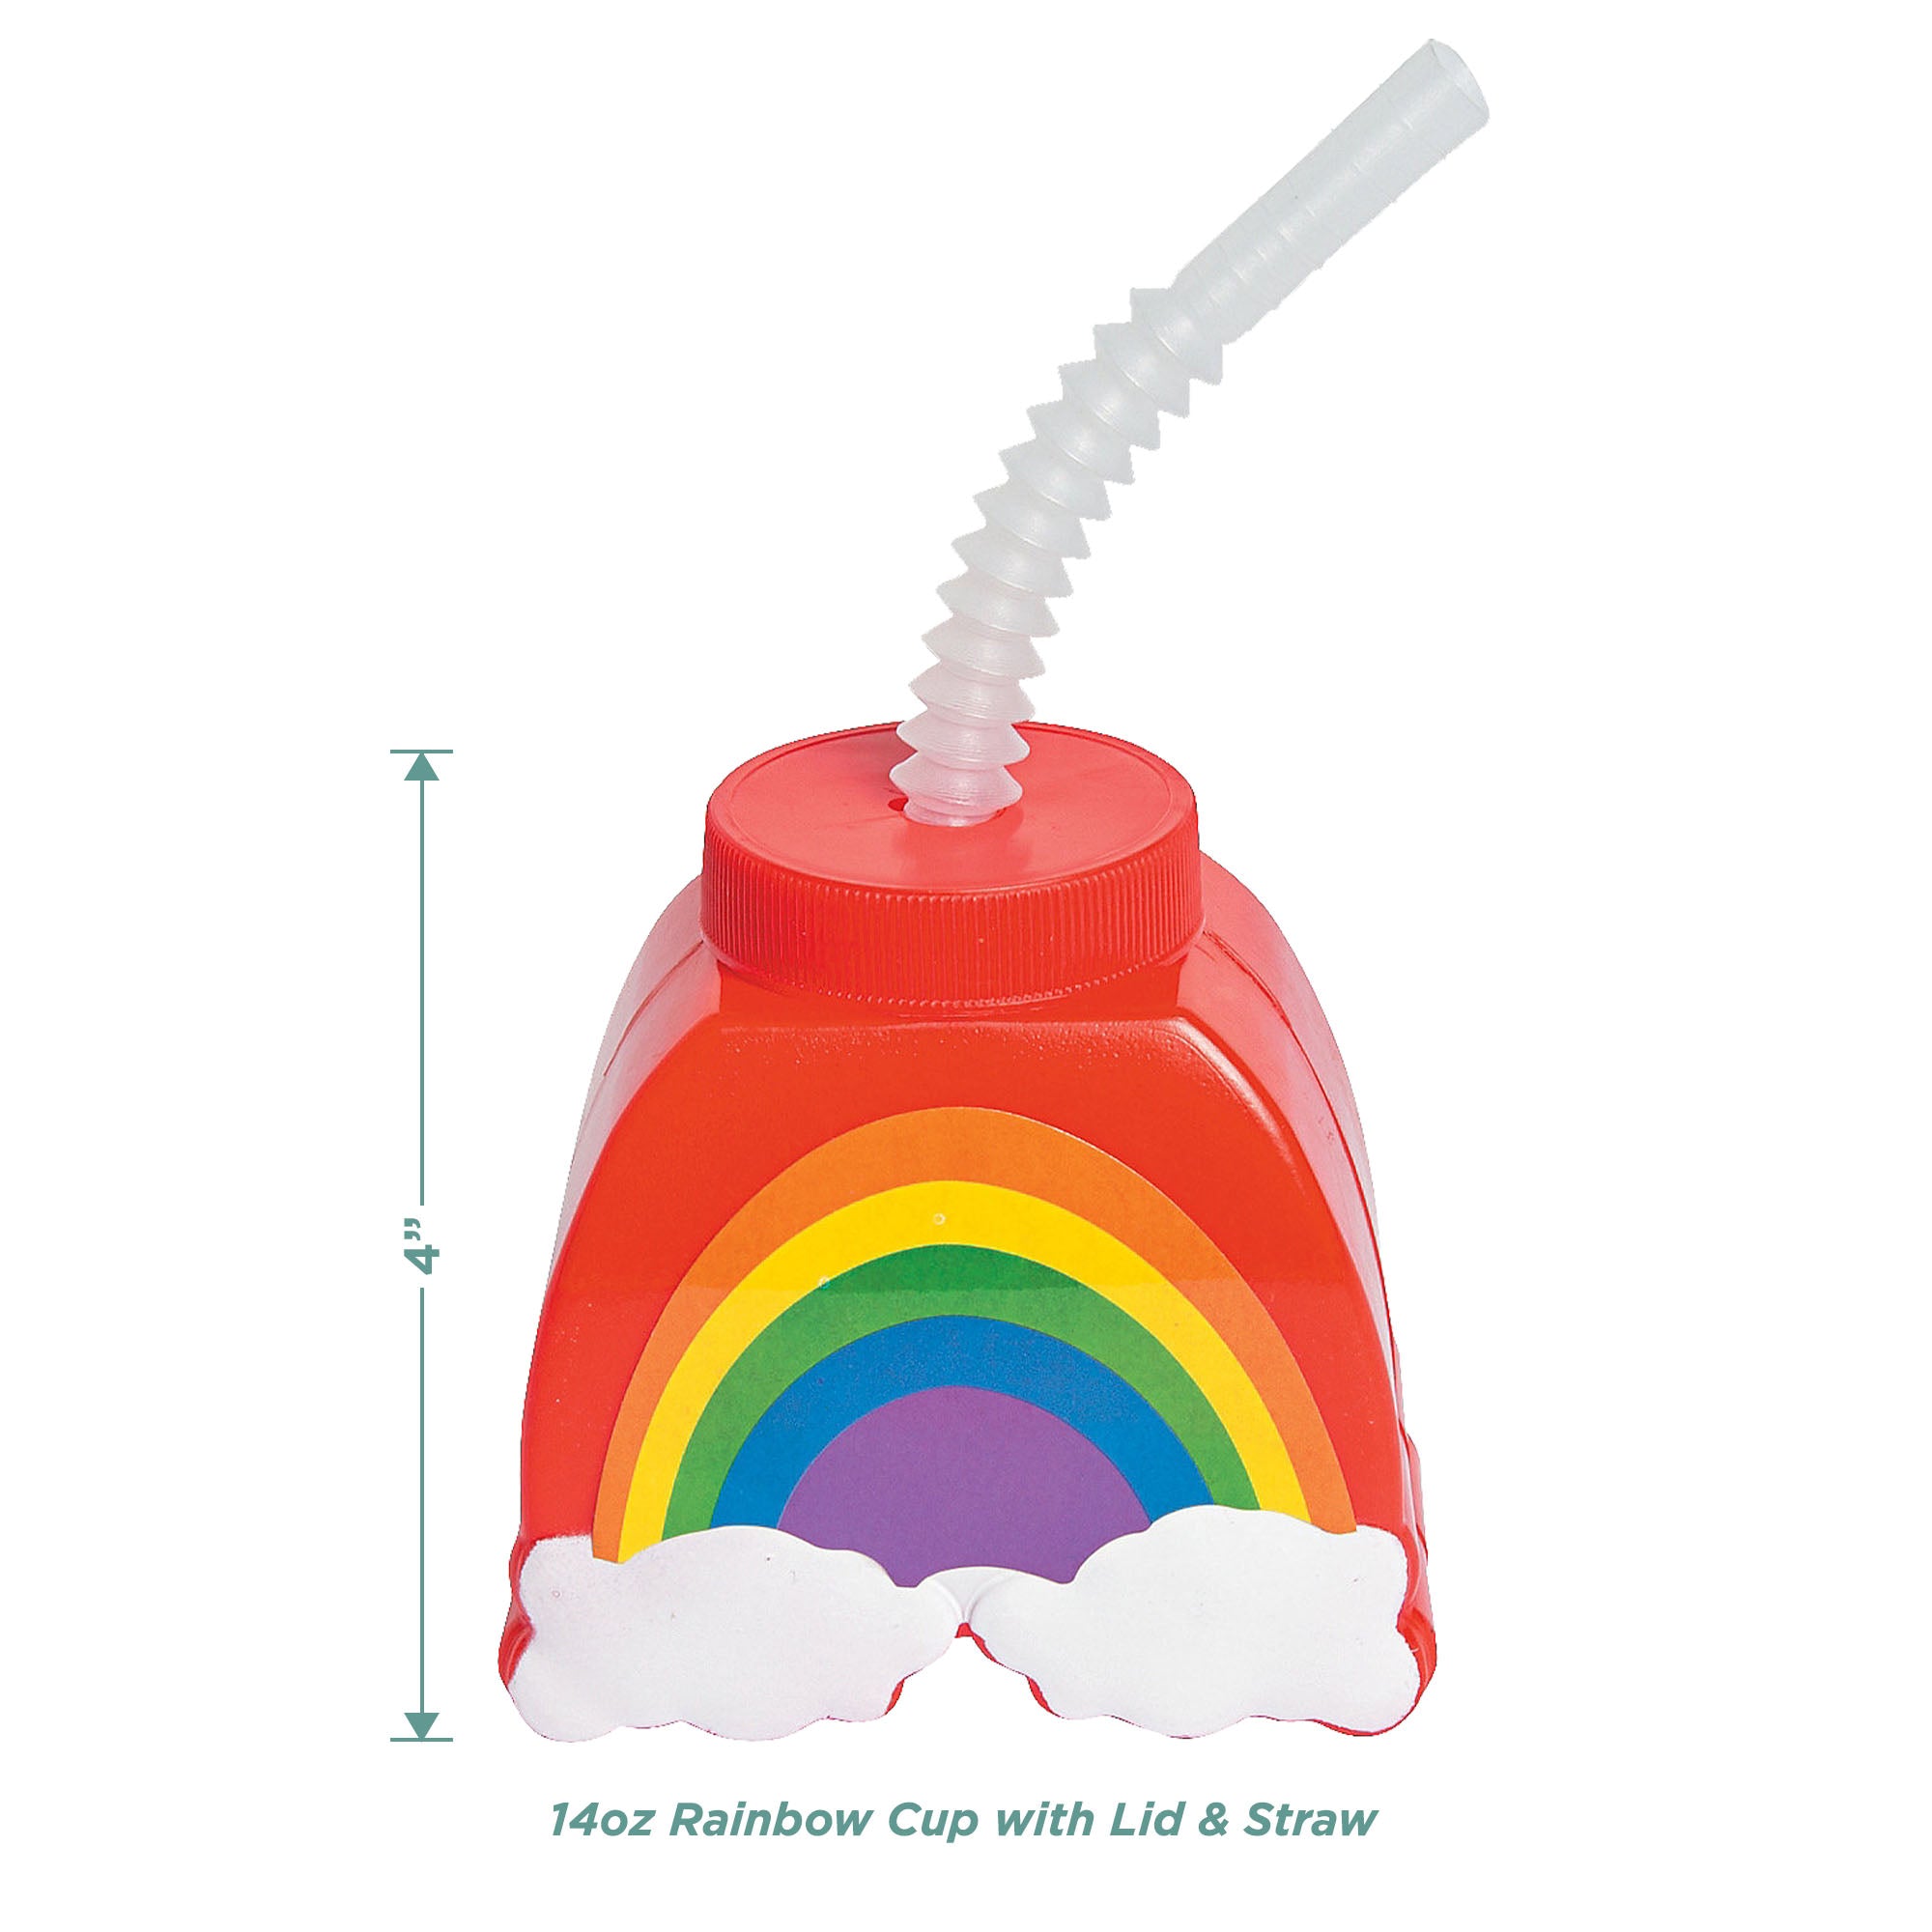 Rainbow Party Favors - Plastic Rainbow Shaped Cups With Lids and